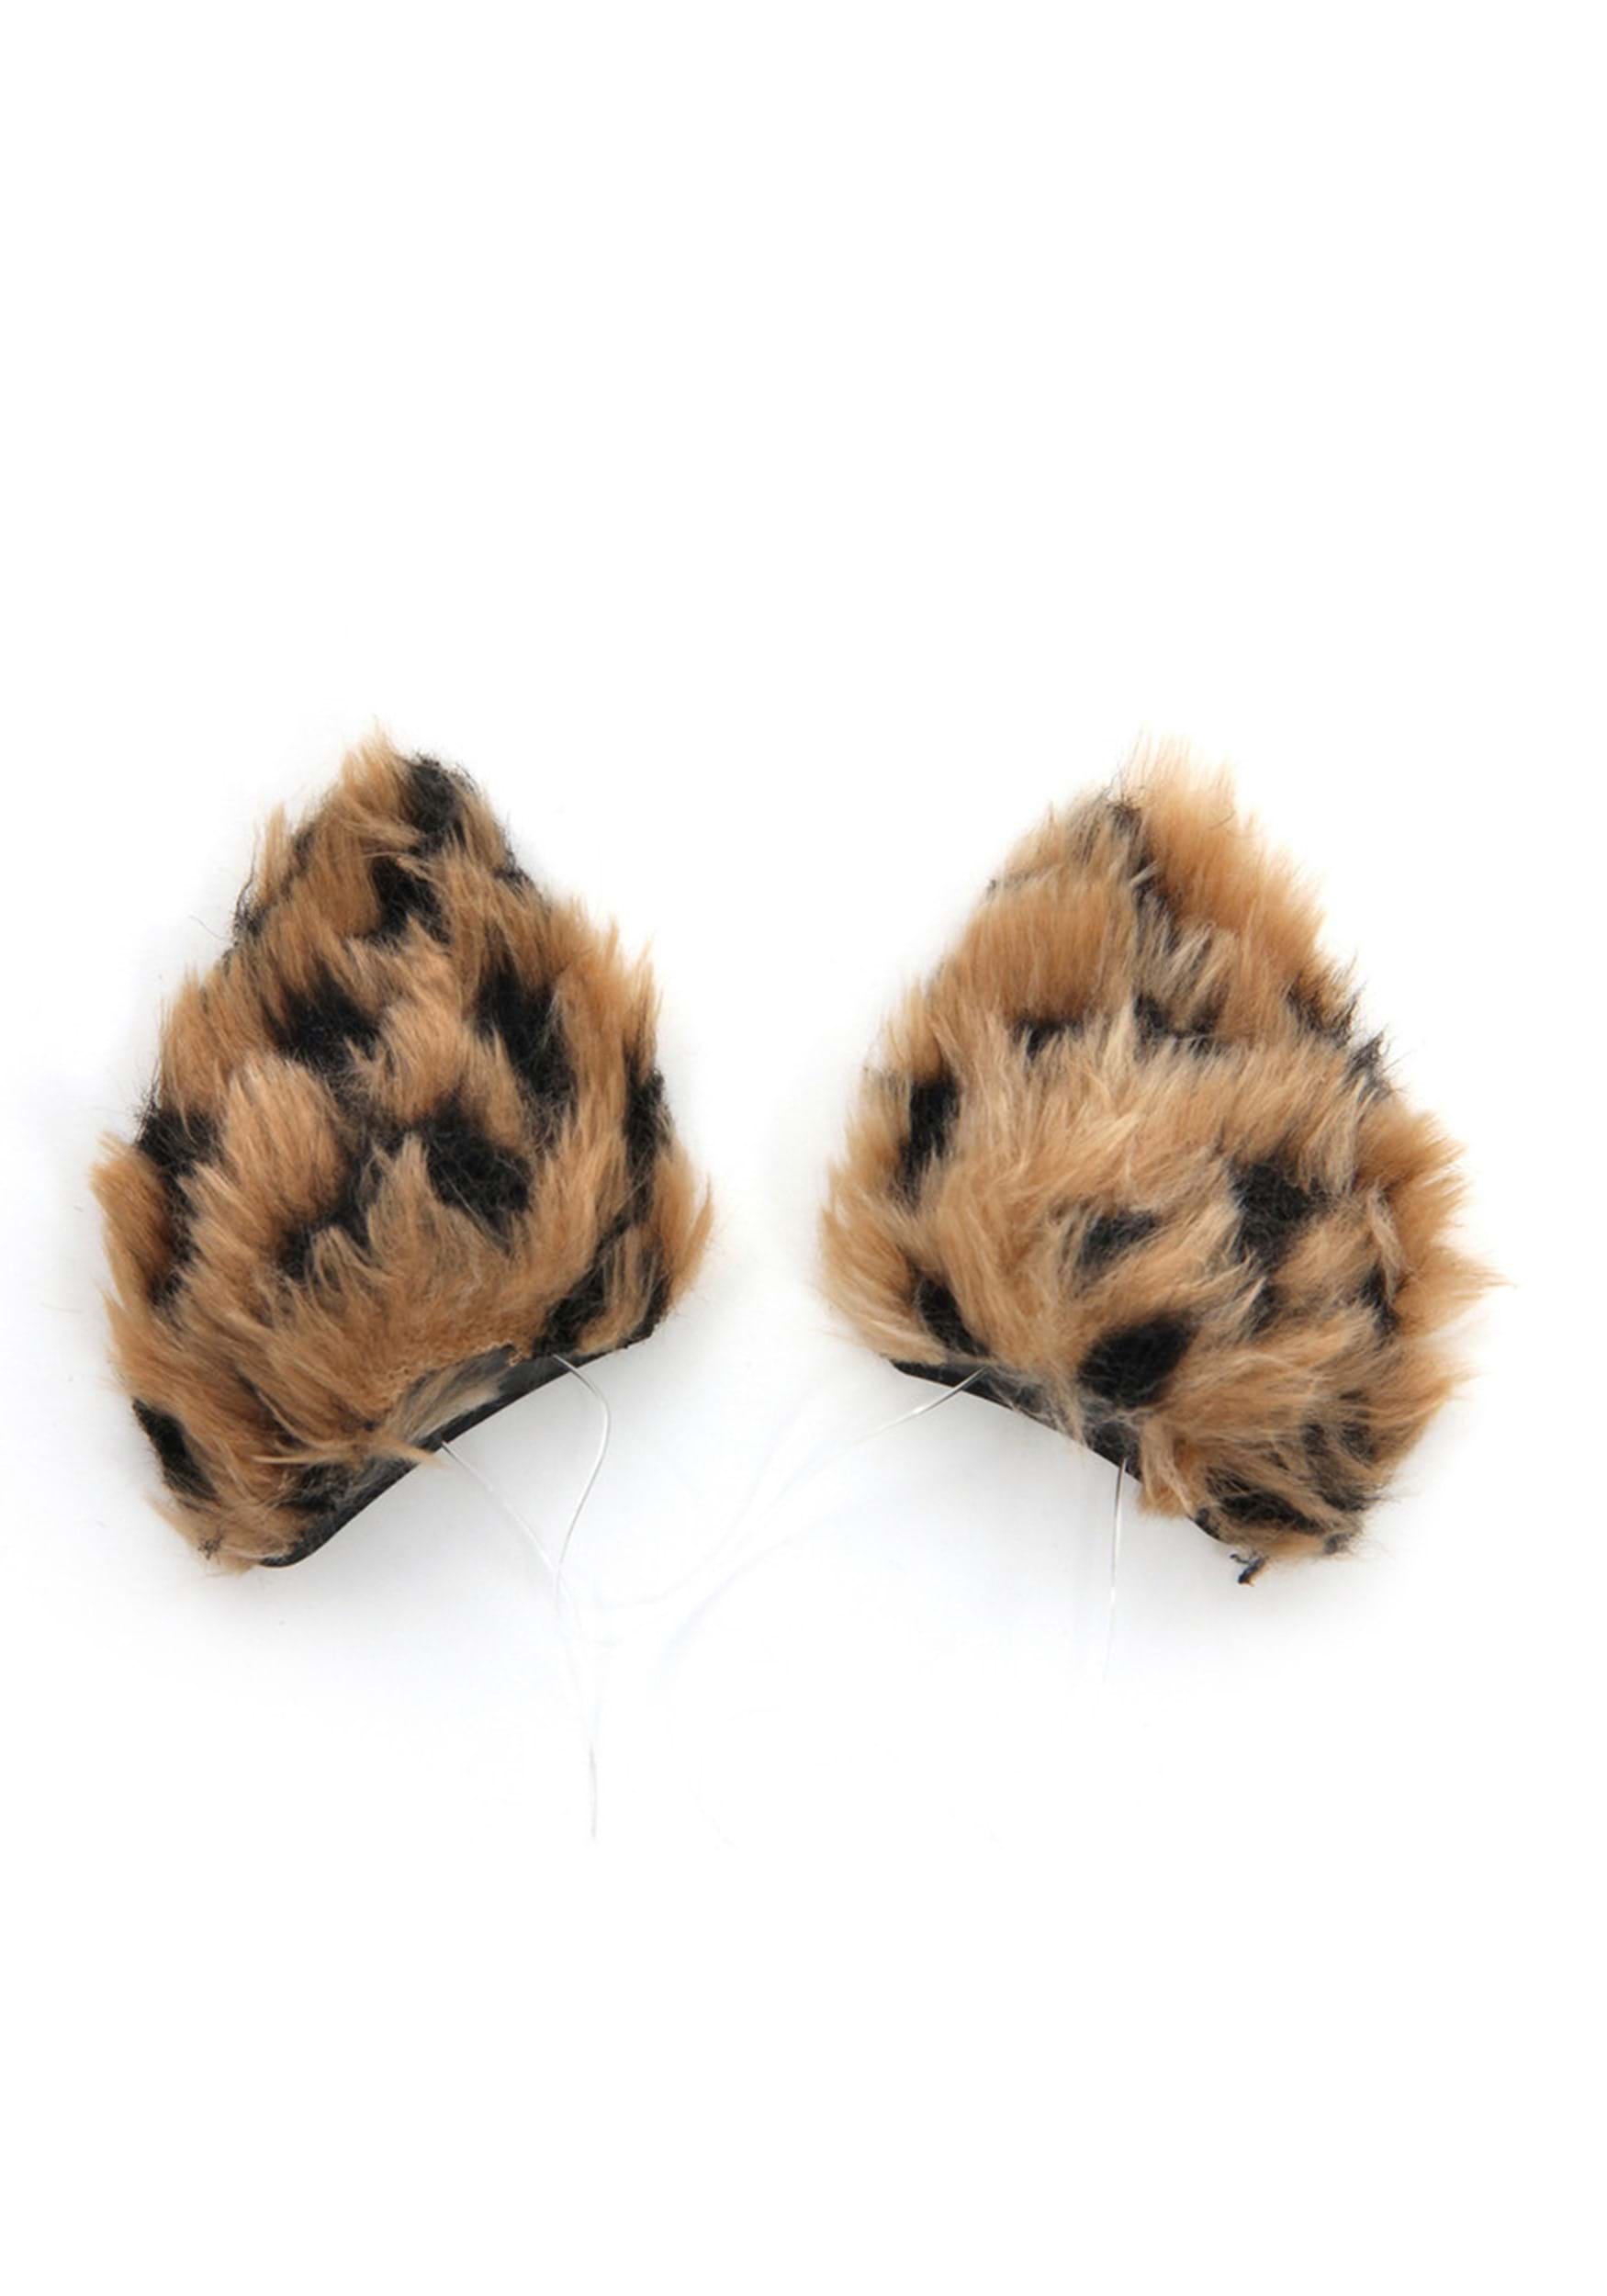 Cheetah Tail And Ears Fancy Dress Costume Kit , Cat Fancy Dress Costume Accessories